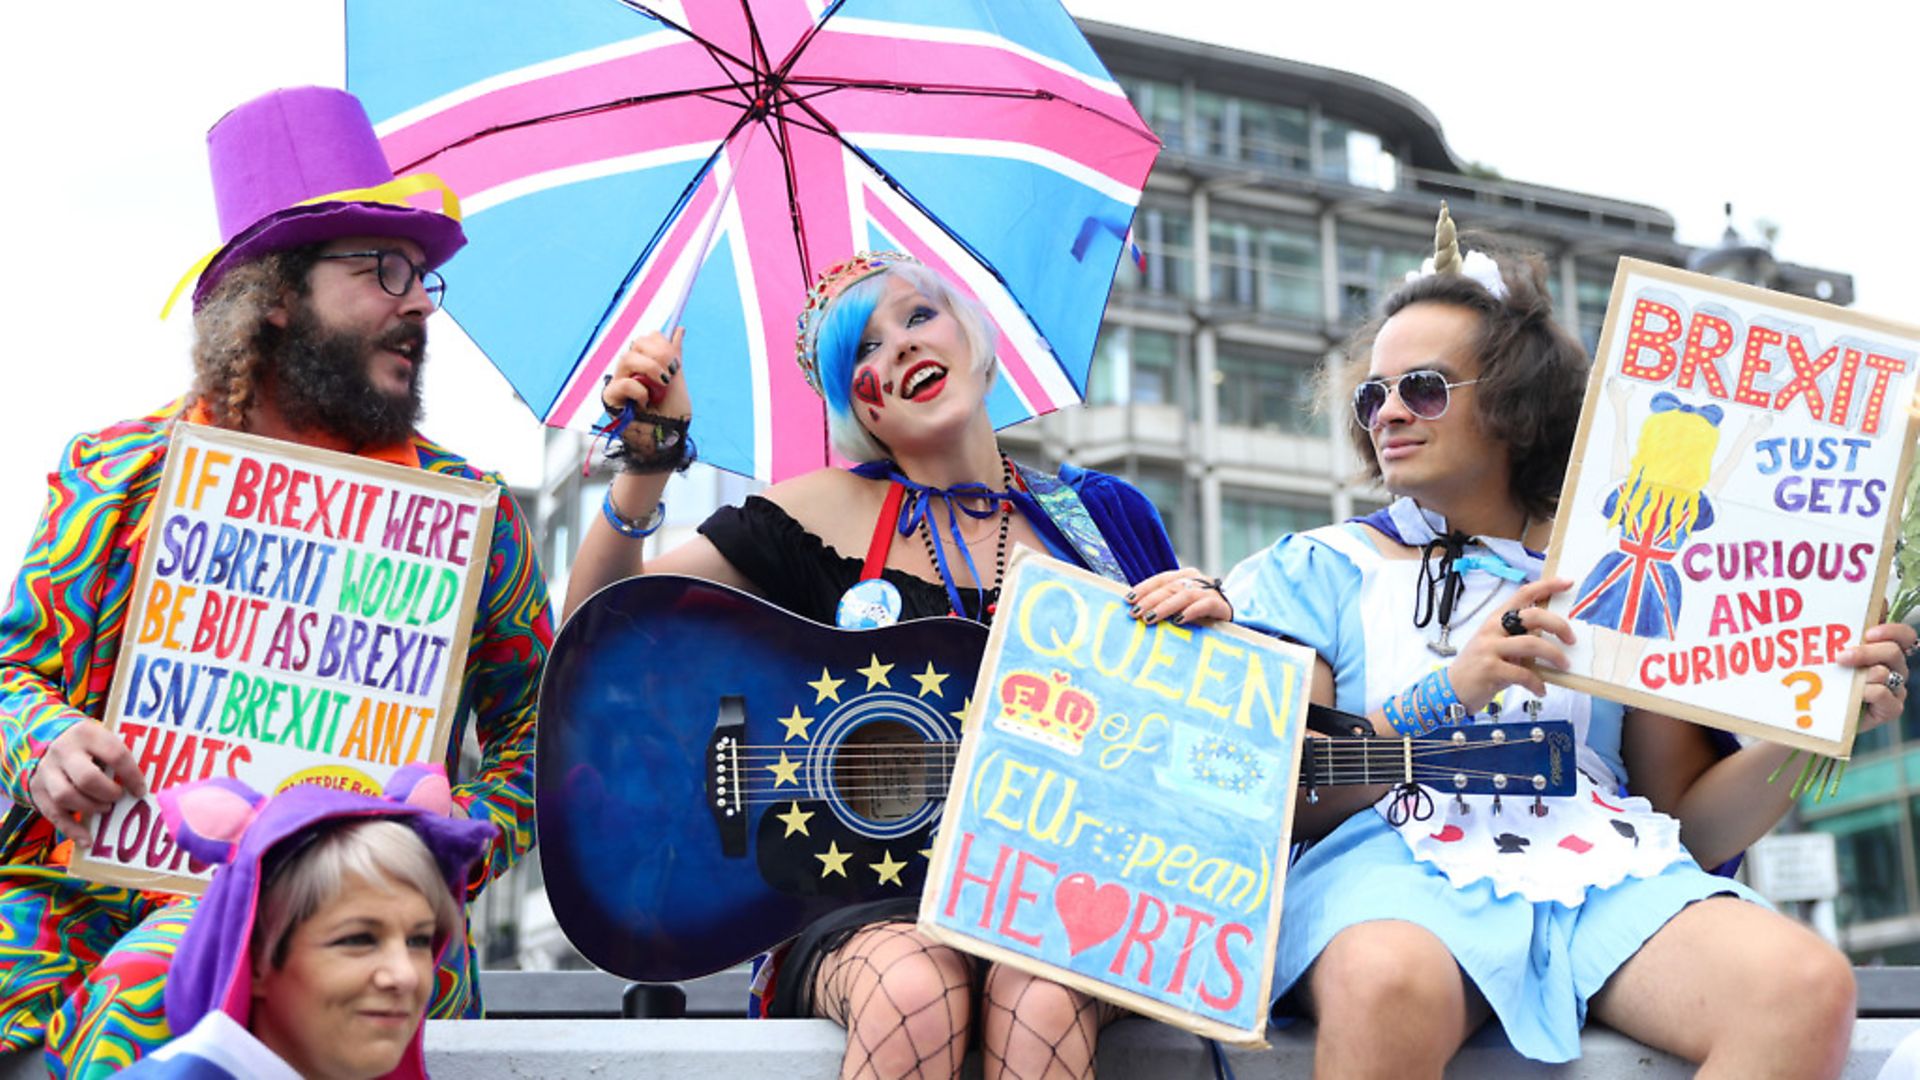 Madeleina Kay, the self-styled 'EU Supergirl', with pro-European Union supporters ahead of the March for Change. Picture: Aaron Chown/PA Wire/PA Images - Credit: PA Wire/PA Images